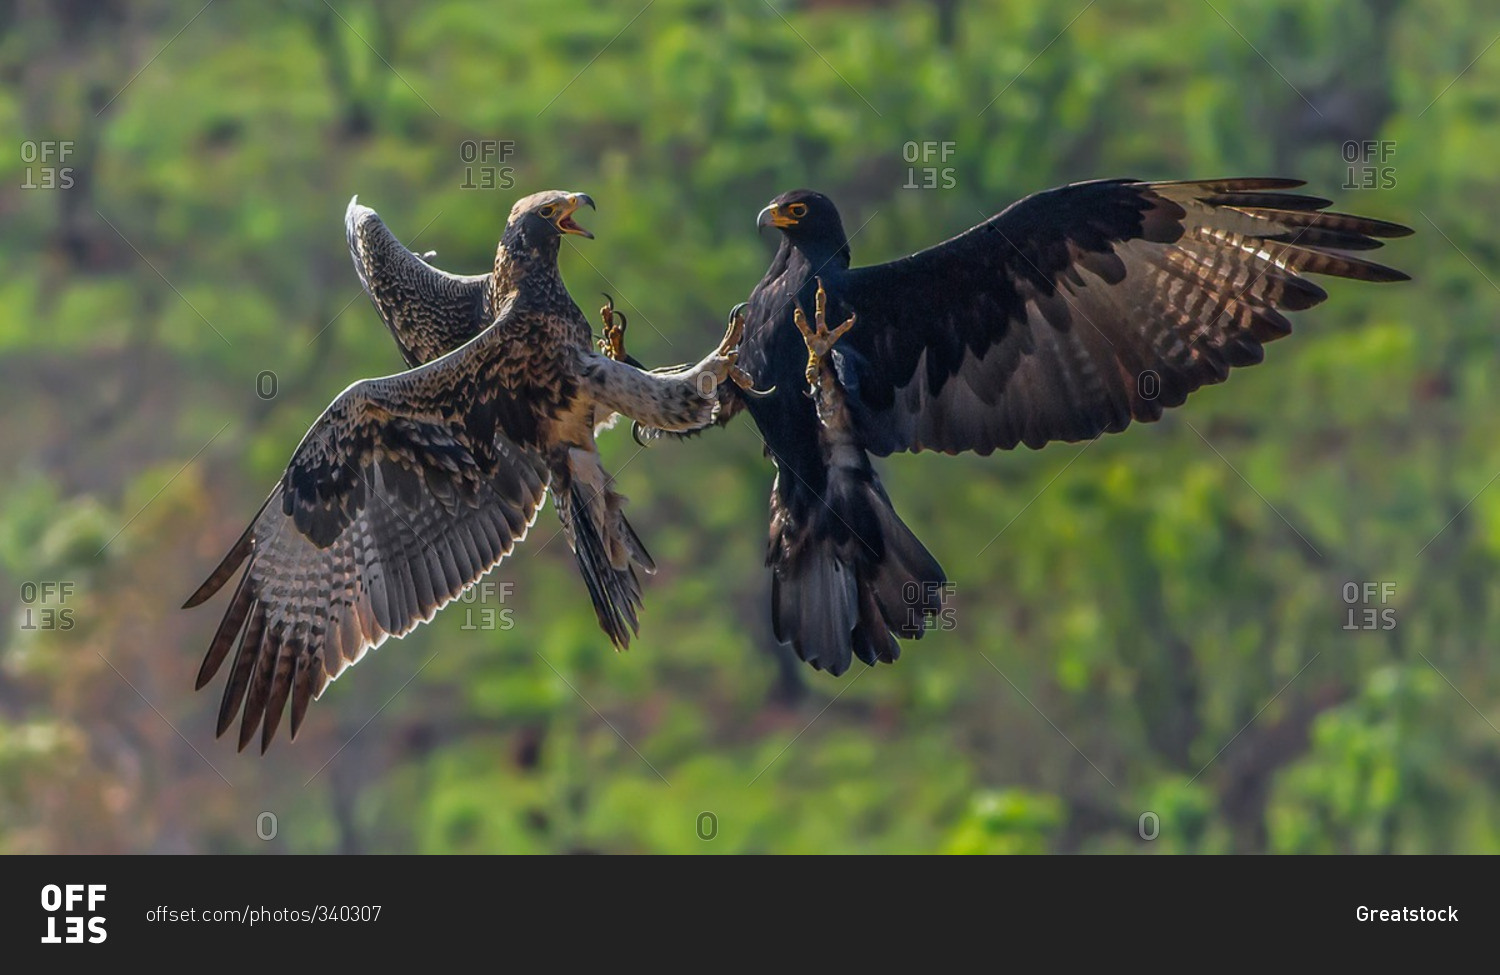 Ferocious black eagle attacking a fledgling from the nest stock photo